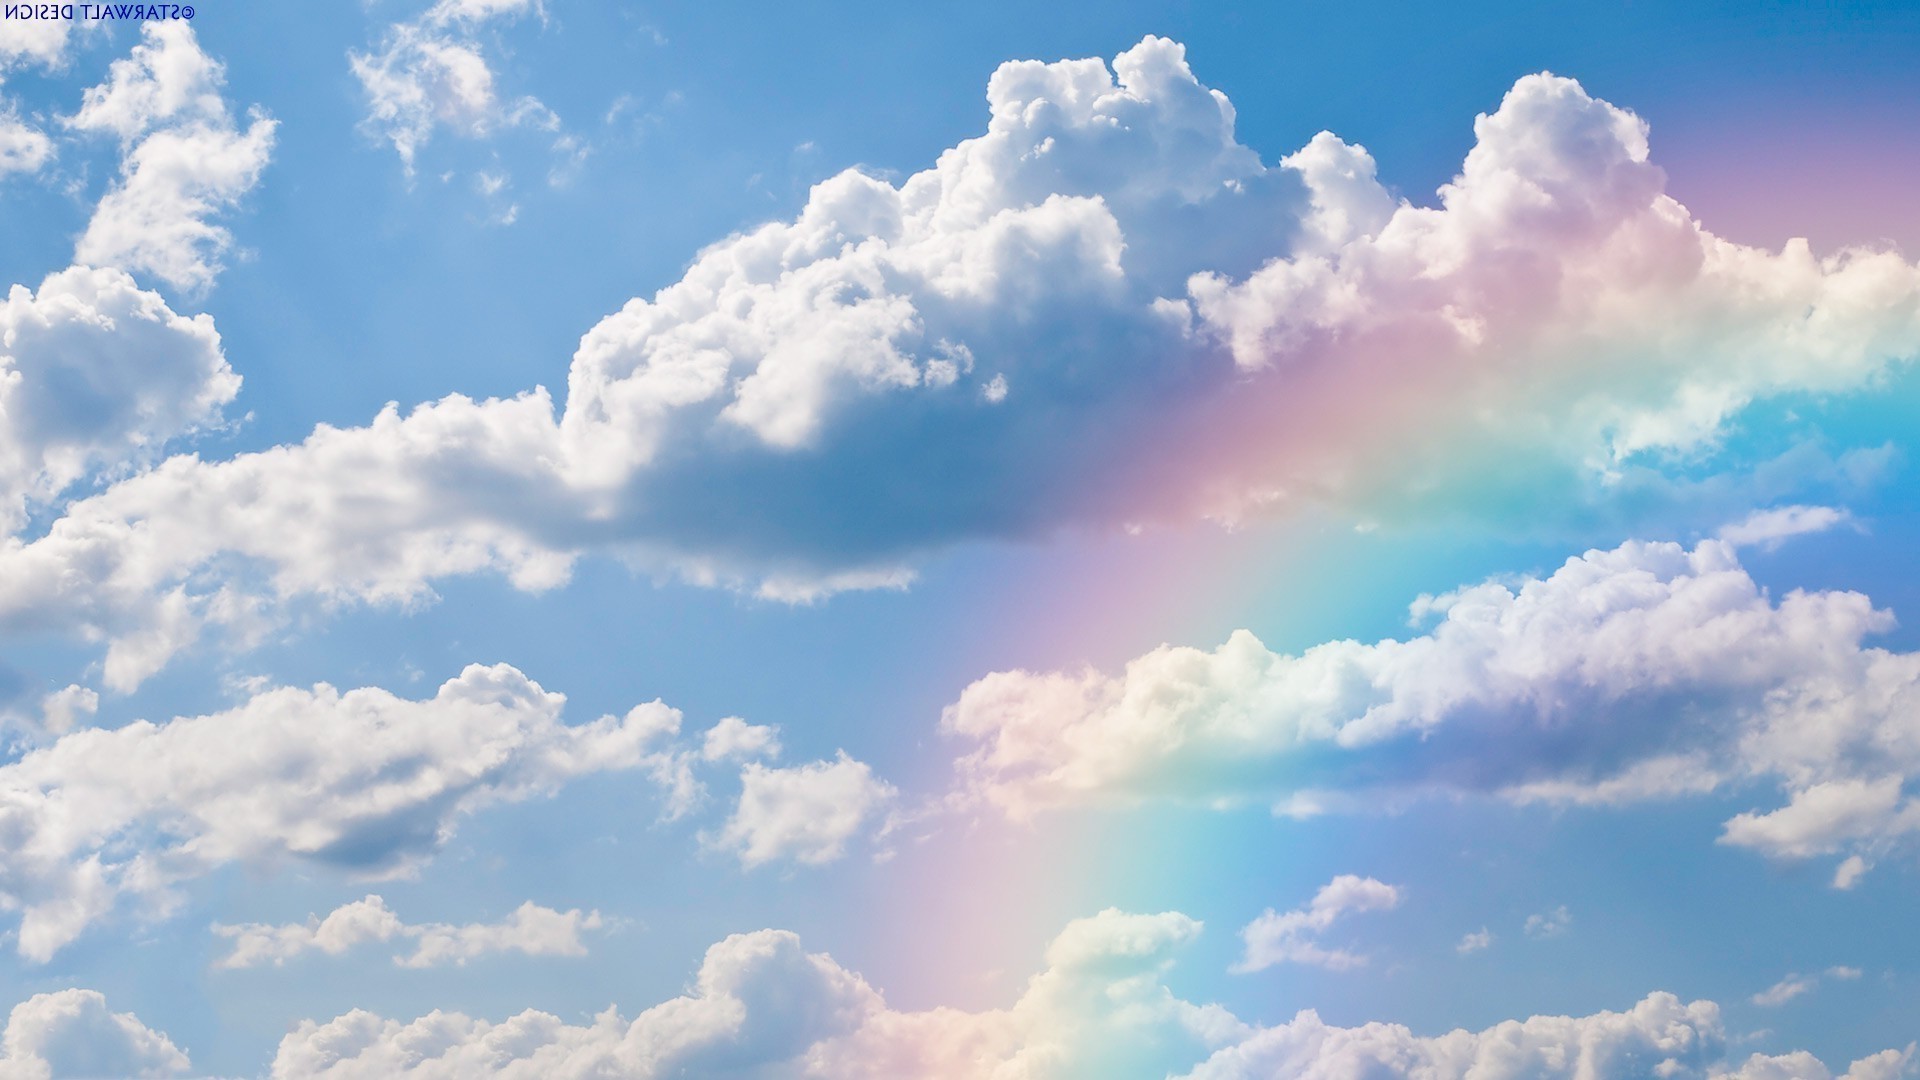 Rainbow in the clouds wallpaper 15621